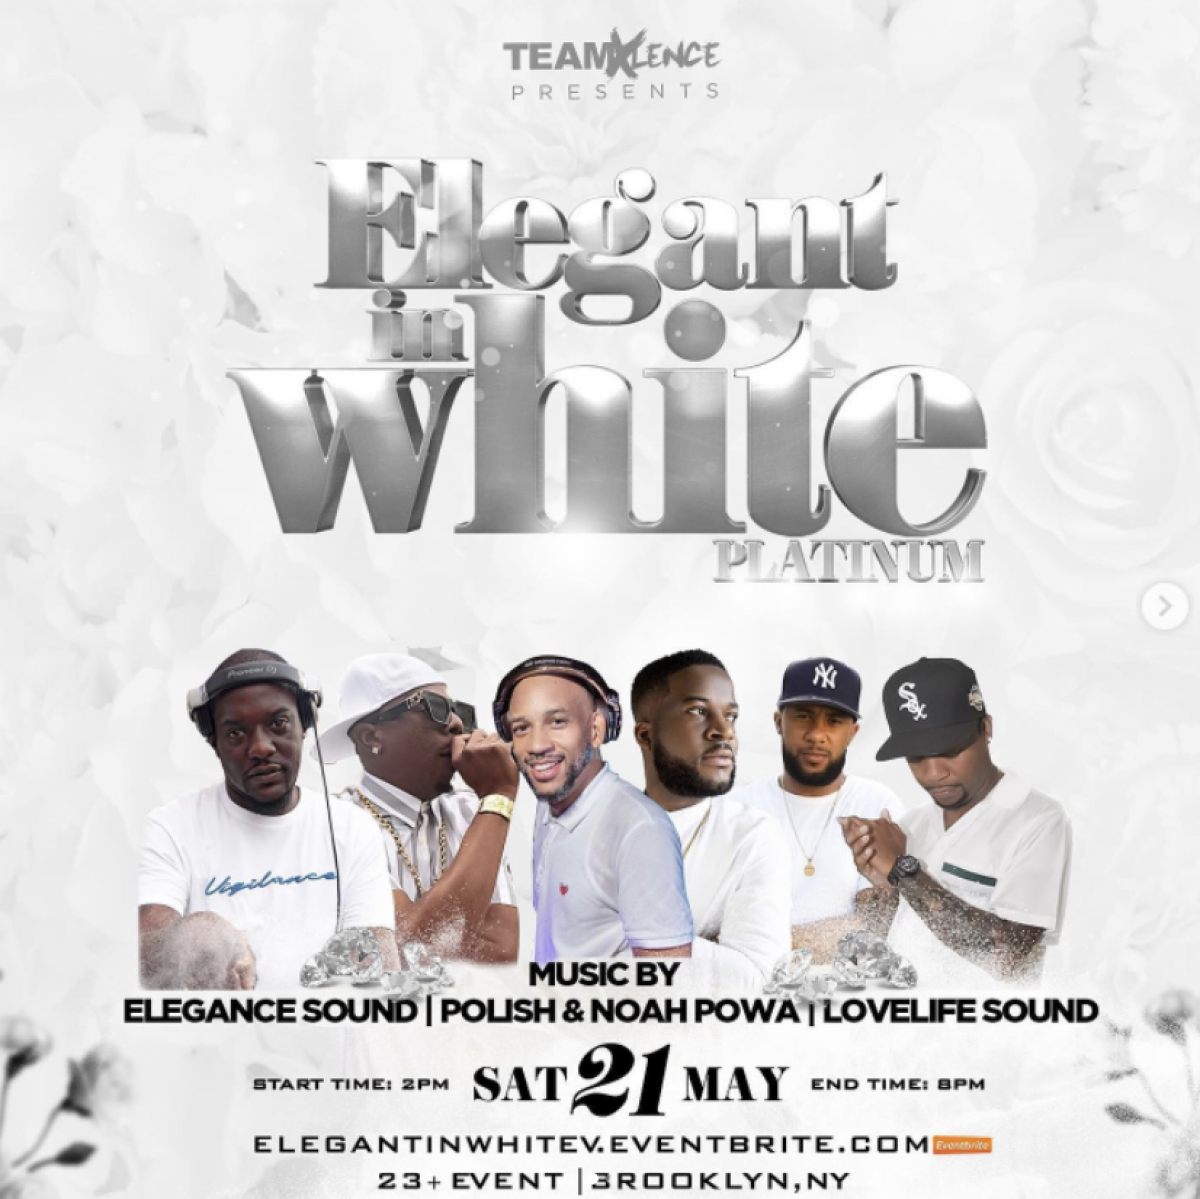 Elegant In White flyer or graphic.